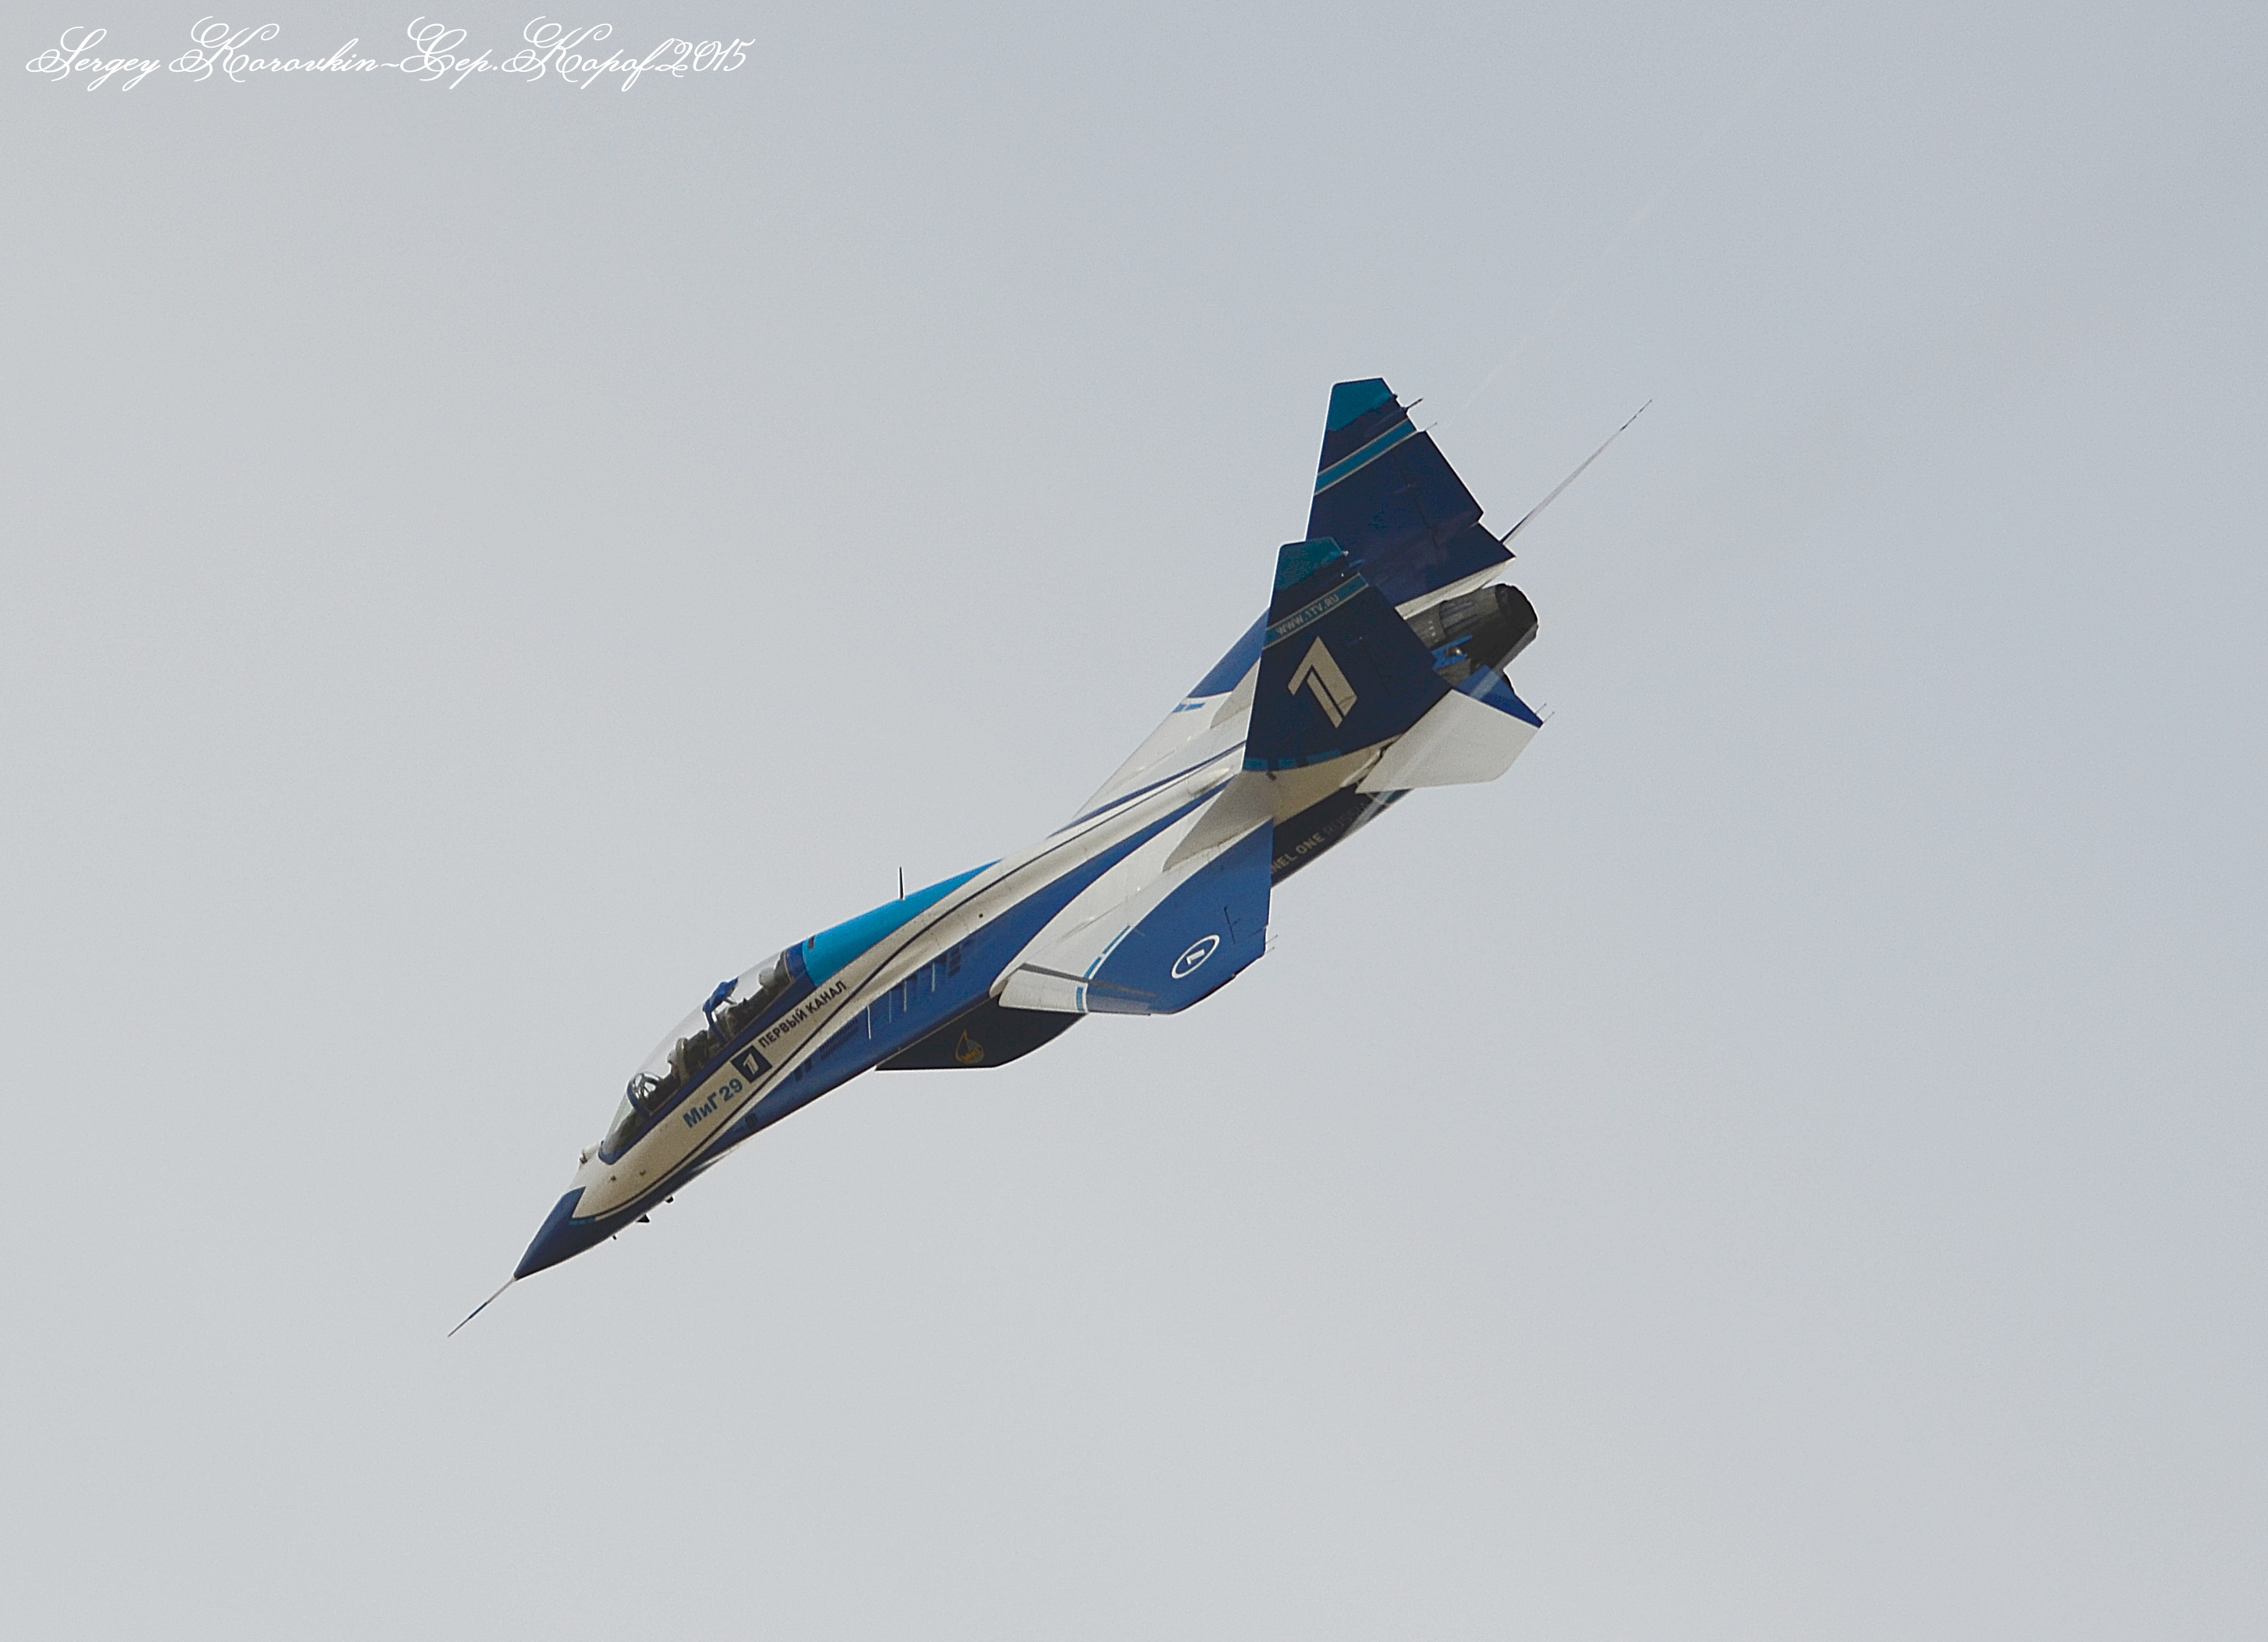 MAKS-2015 Air Show: Photos and Discussion - Page 3 0_17be34_576c6533_orig